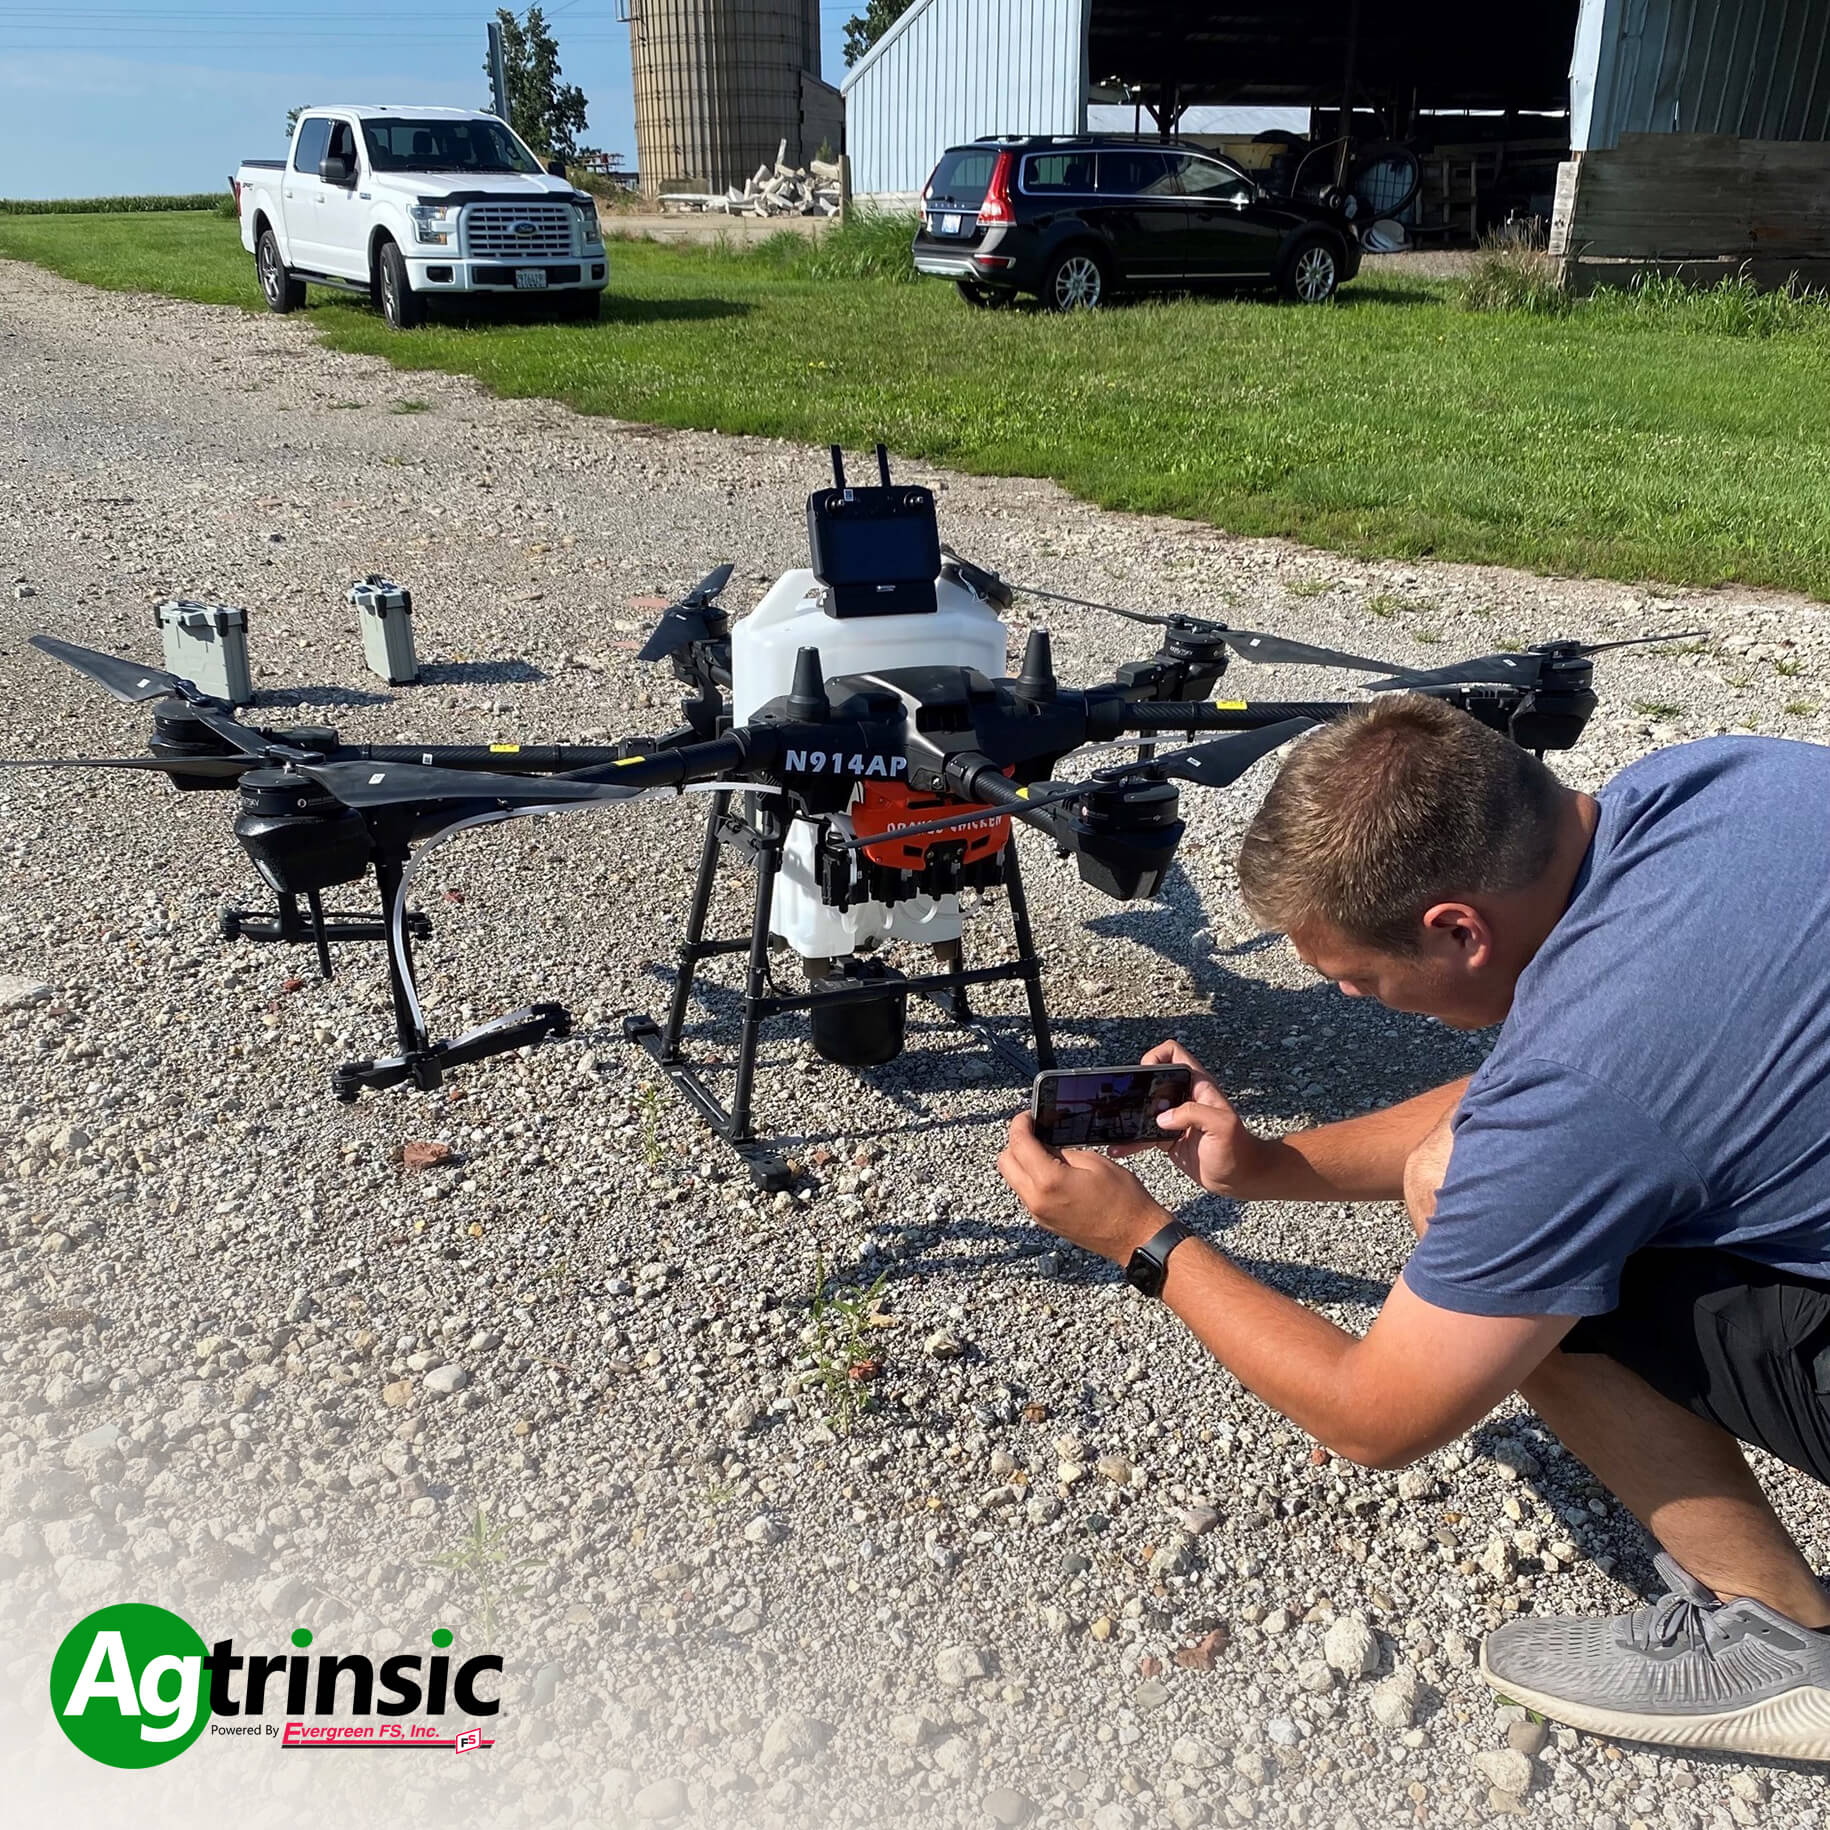 Spray-Drone-AGRAS-T-20-First-Legally-Registered